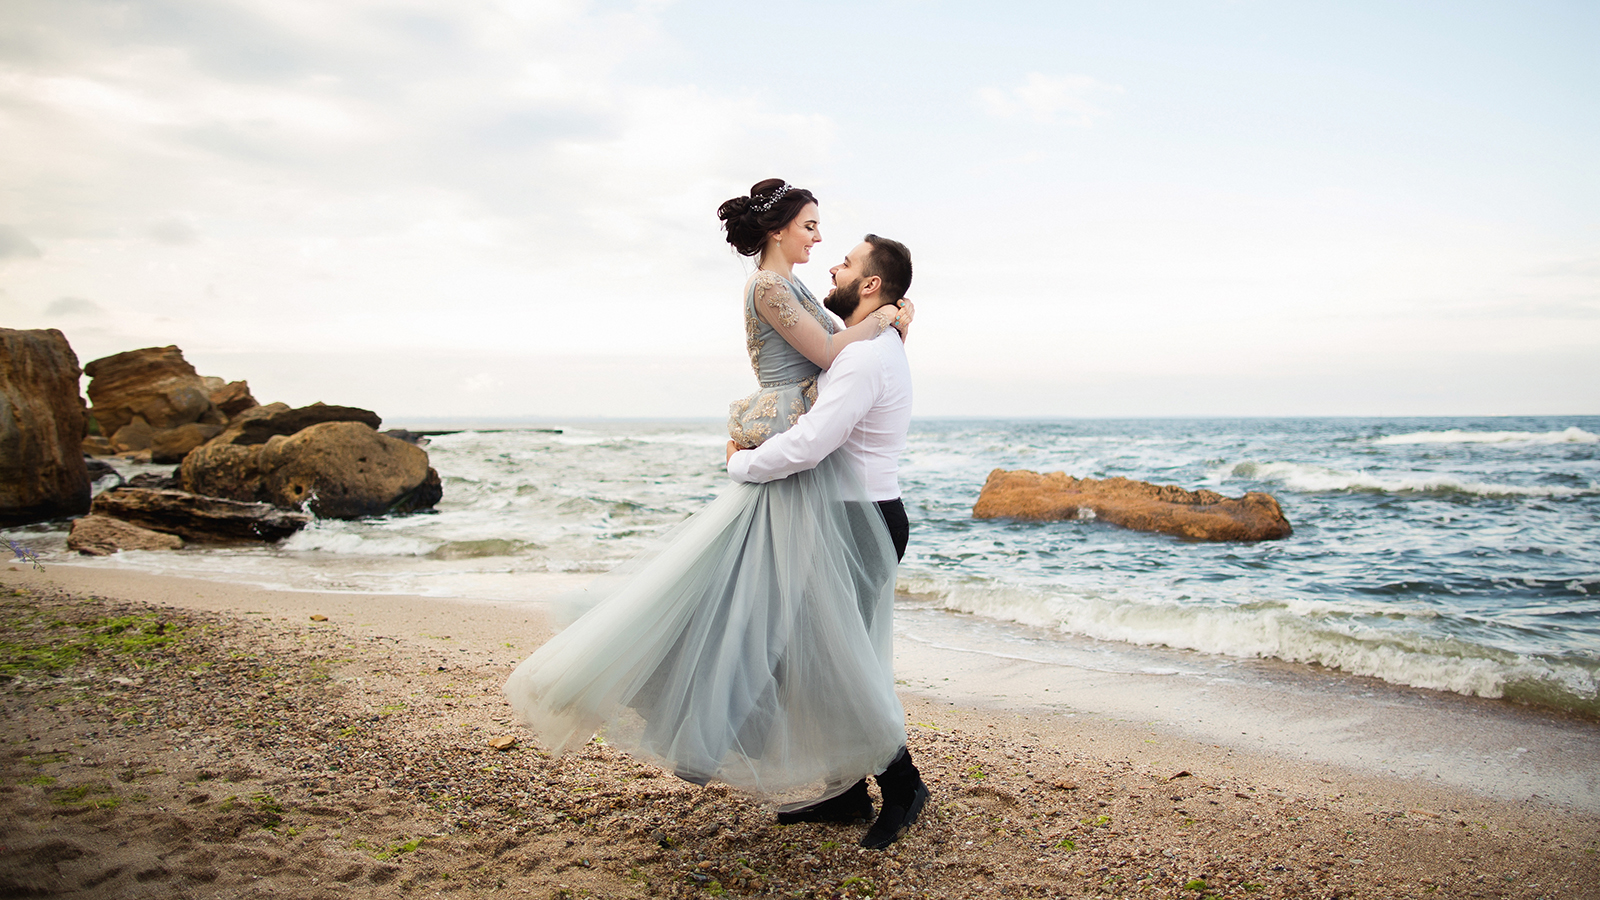 Wedding. Wedding by the sea. Young couple in love, bearded groom and bride in wedding dress at the seaside. Couple in love walking around the sea and the rocks near the place of the wedding ceremony.